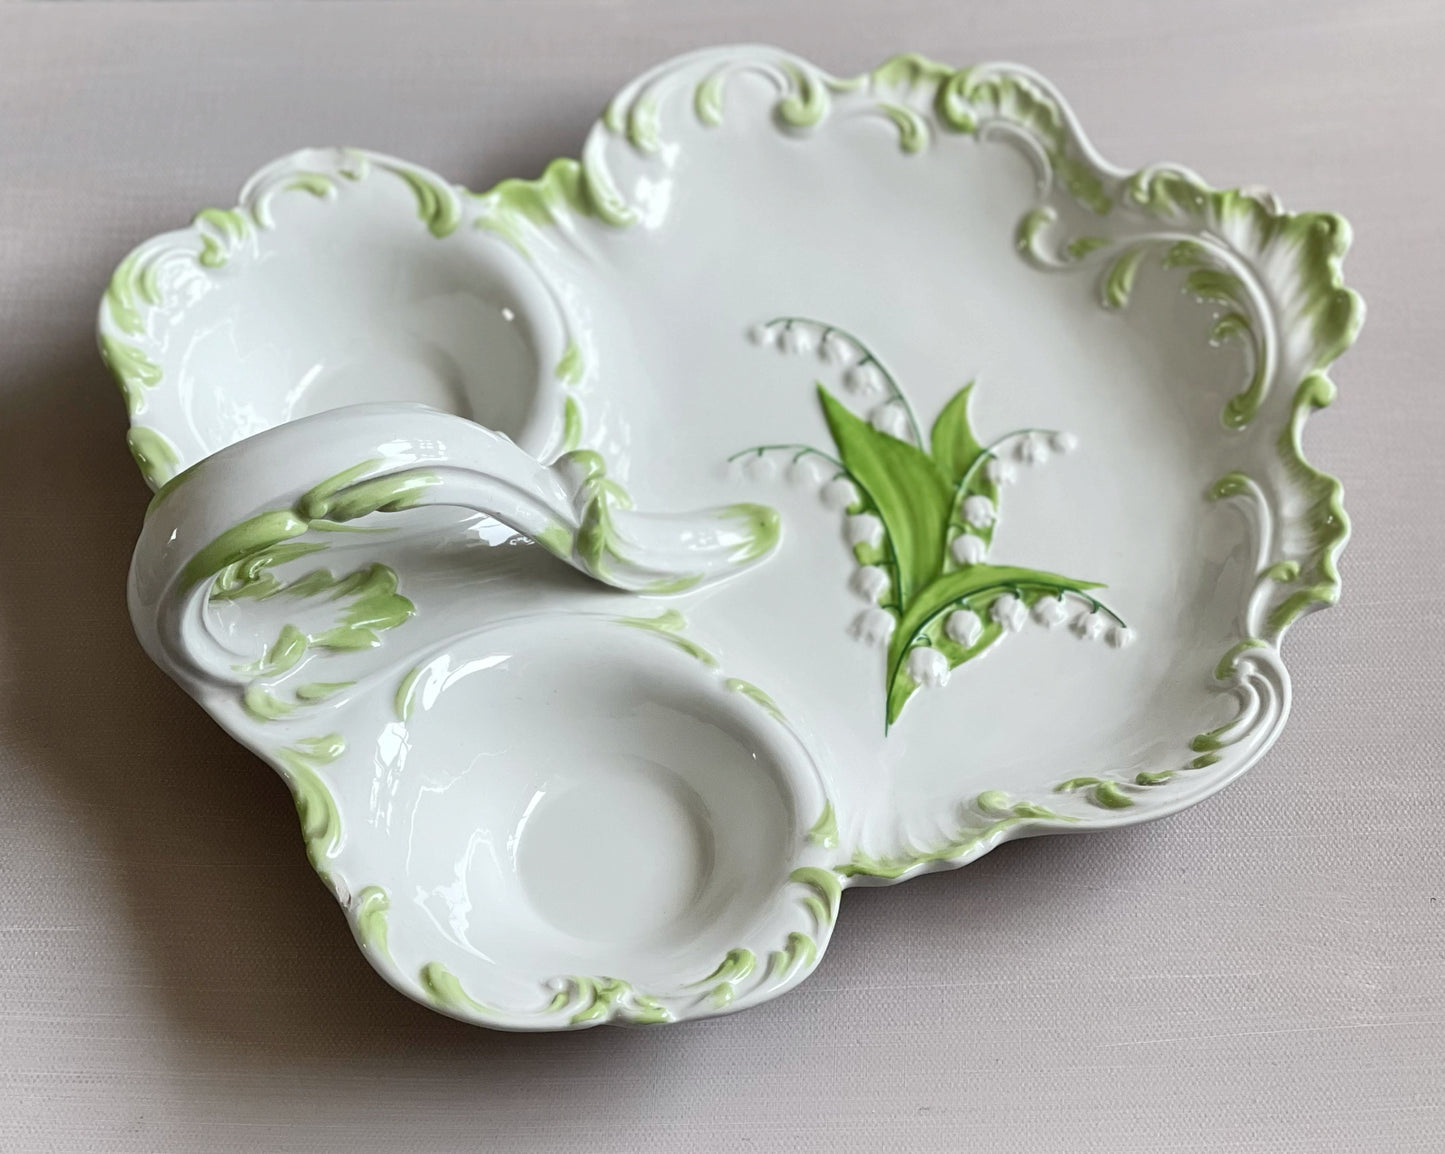 Vintage lily of the valley hand painted decorative divided plate